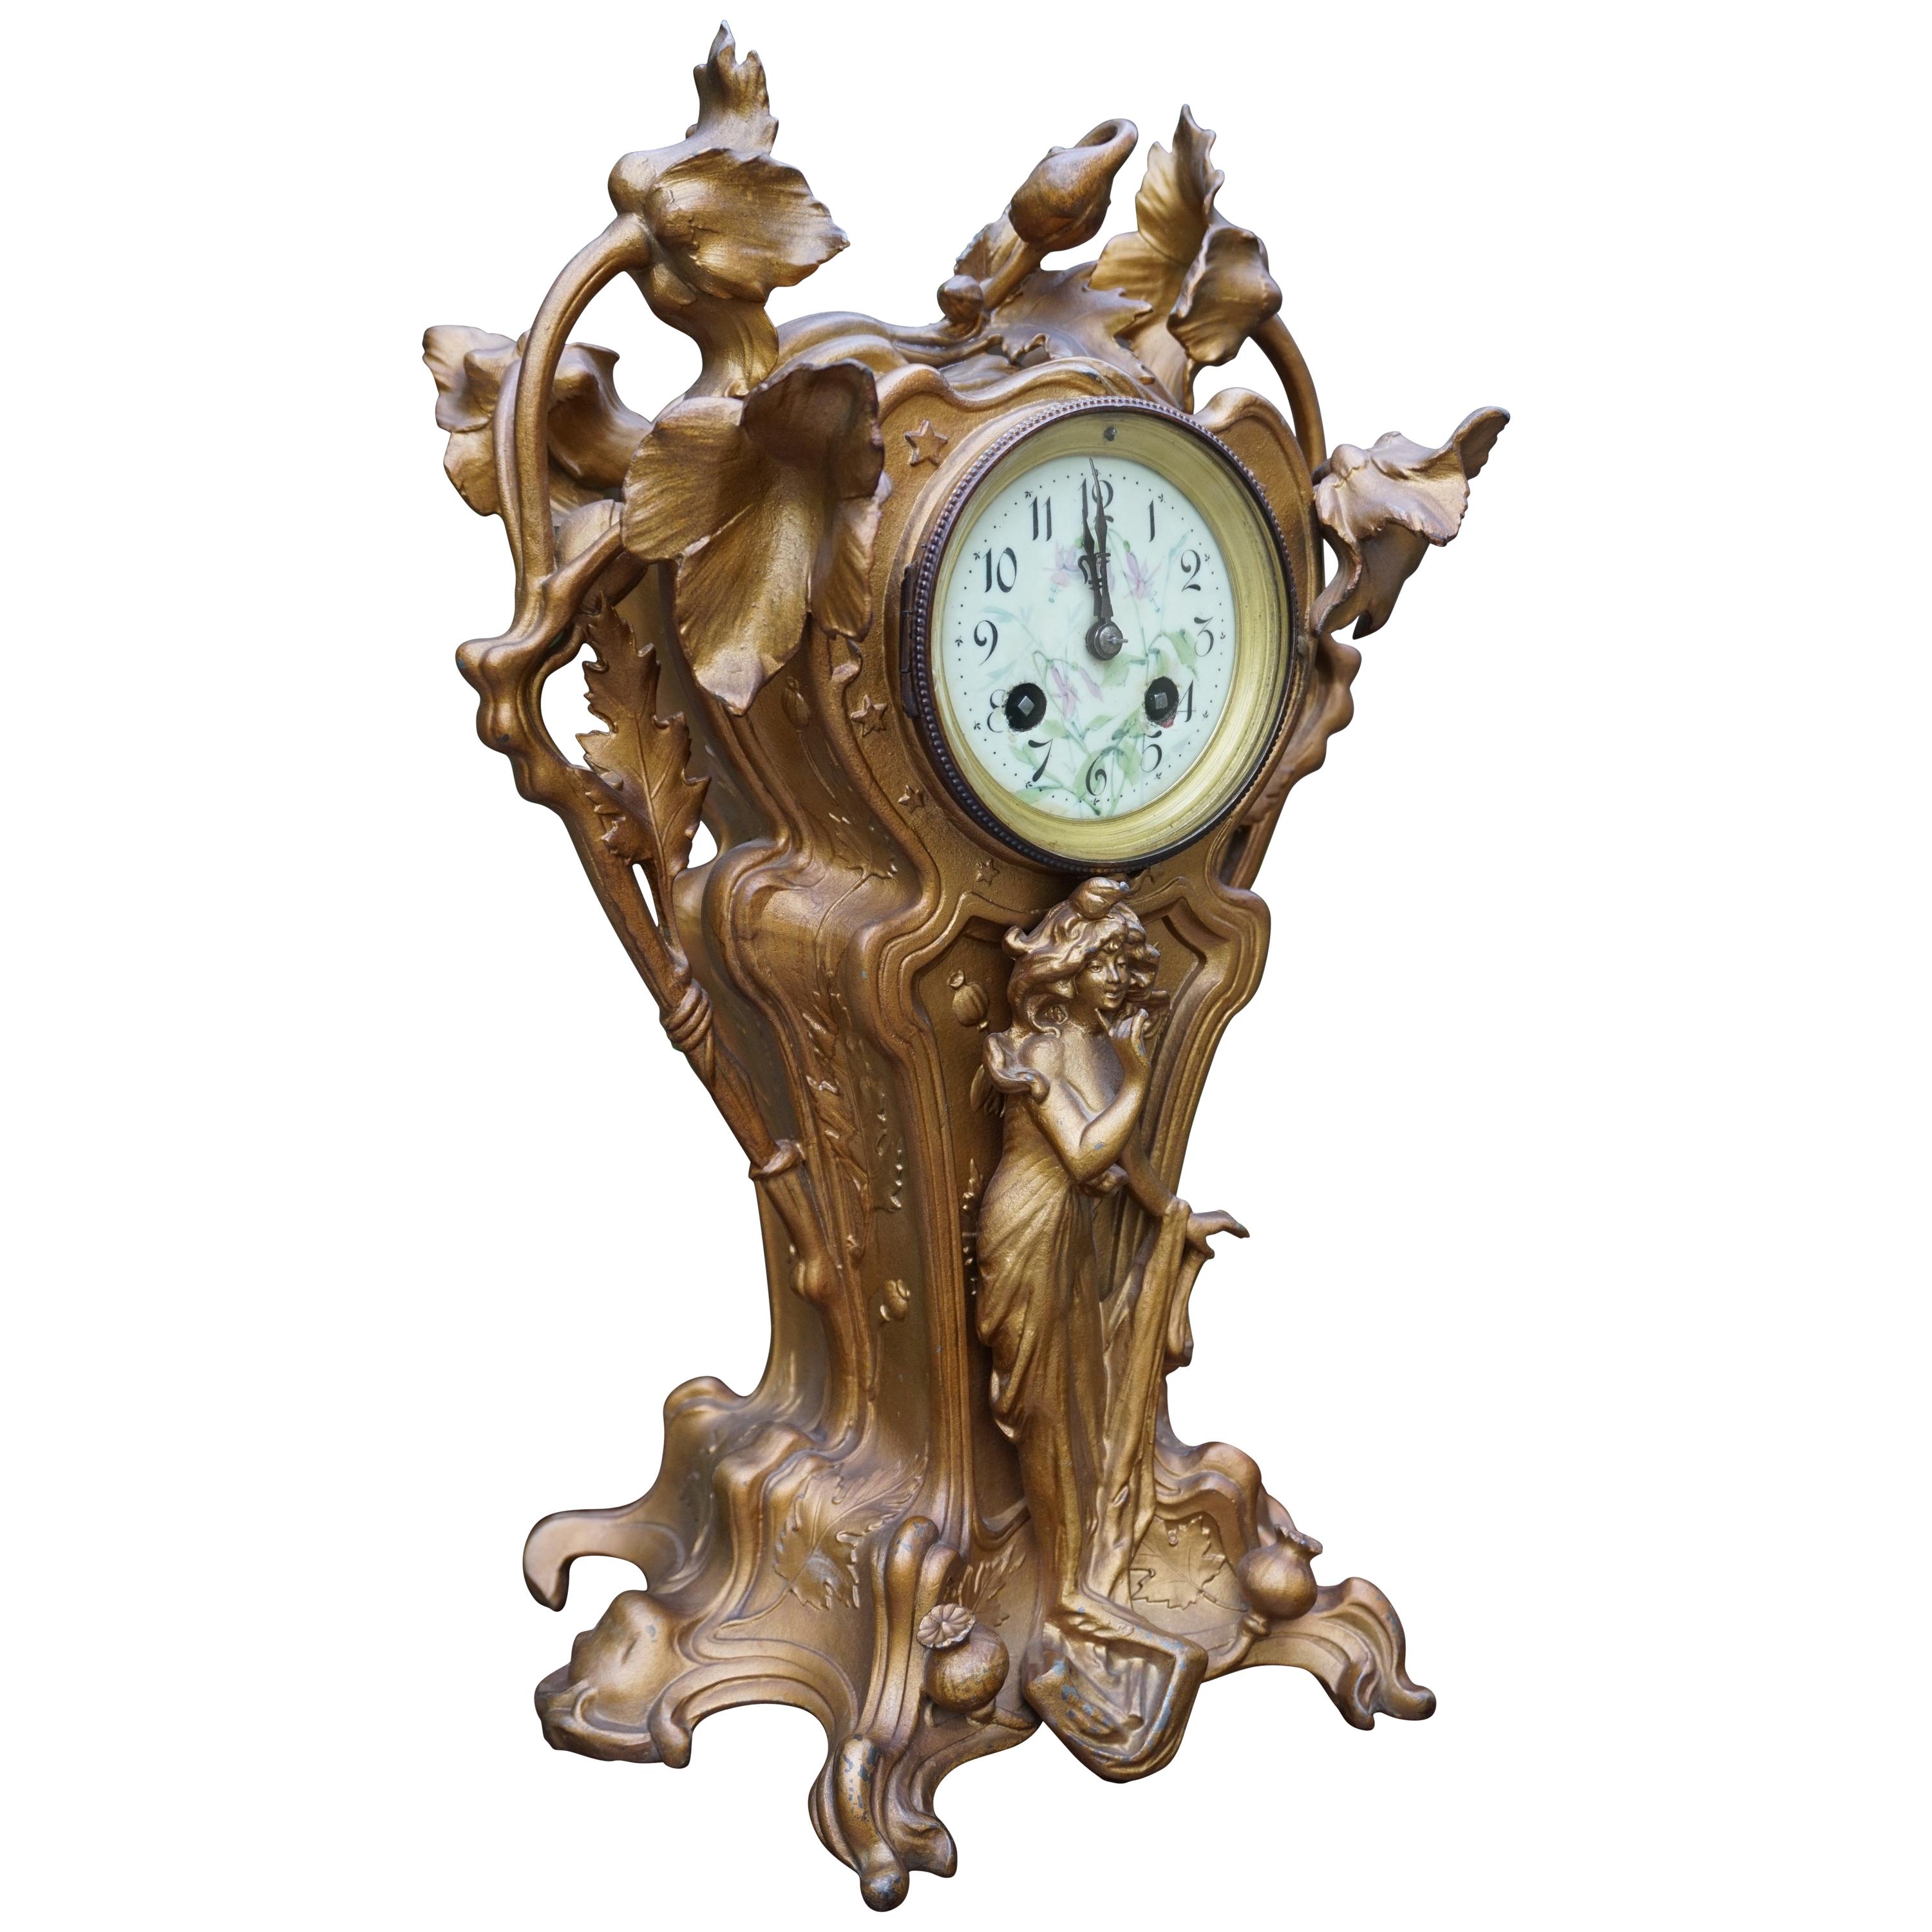 Stunning Early 20th Century Golden Color Art Nouveau Table or Mantel Clock